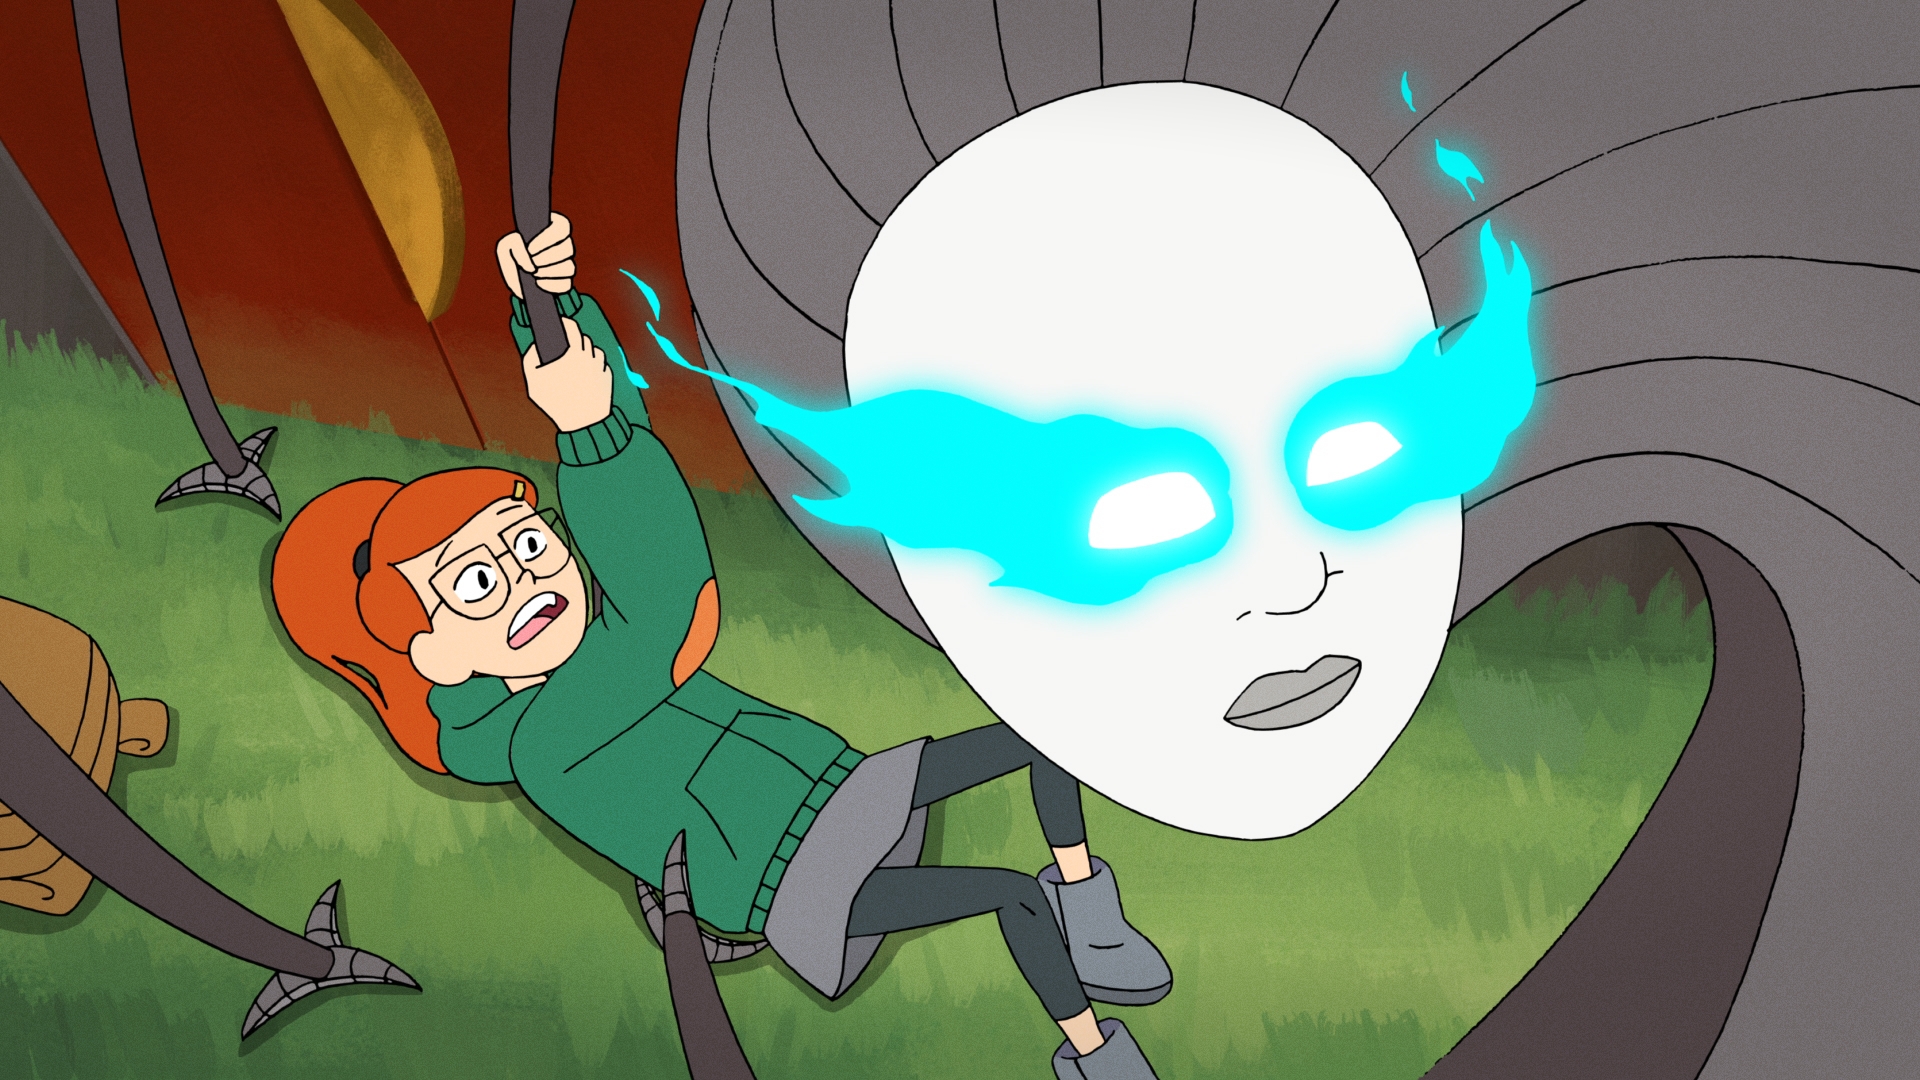 A robot with tentacle claws tries to hold down a young girl in Infinity Train